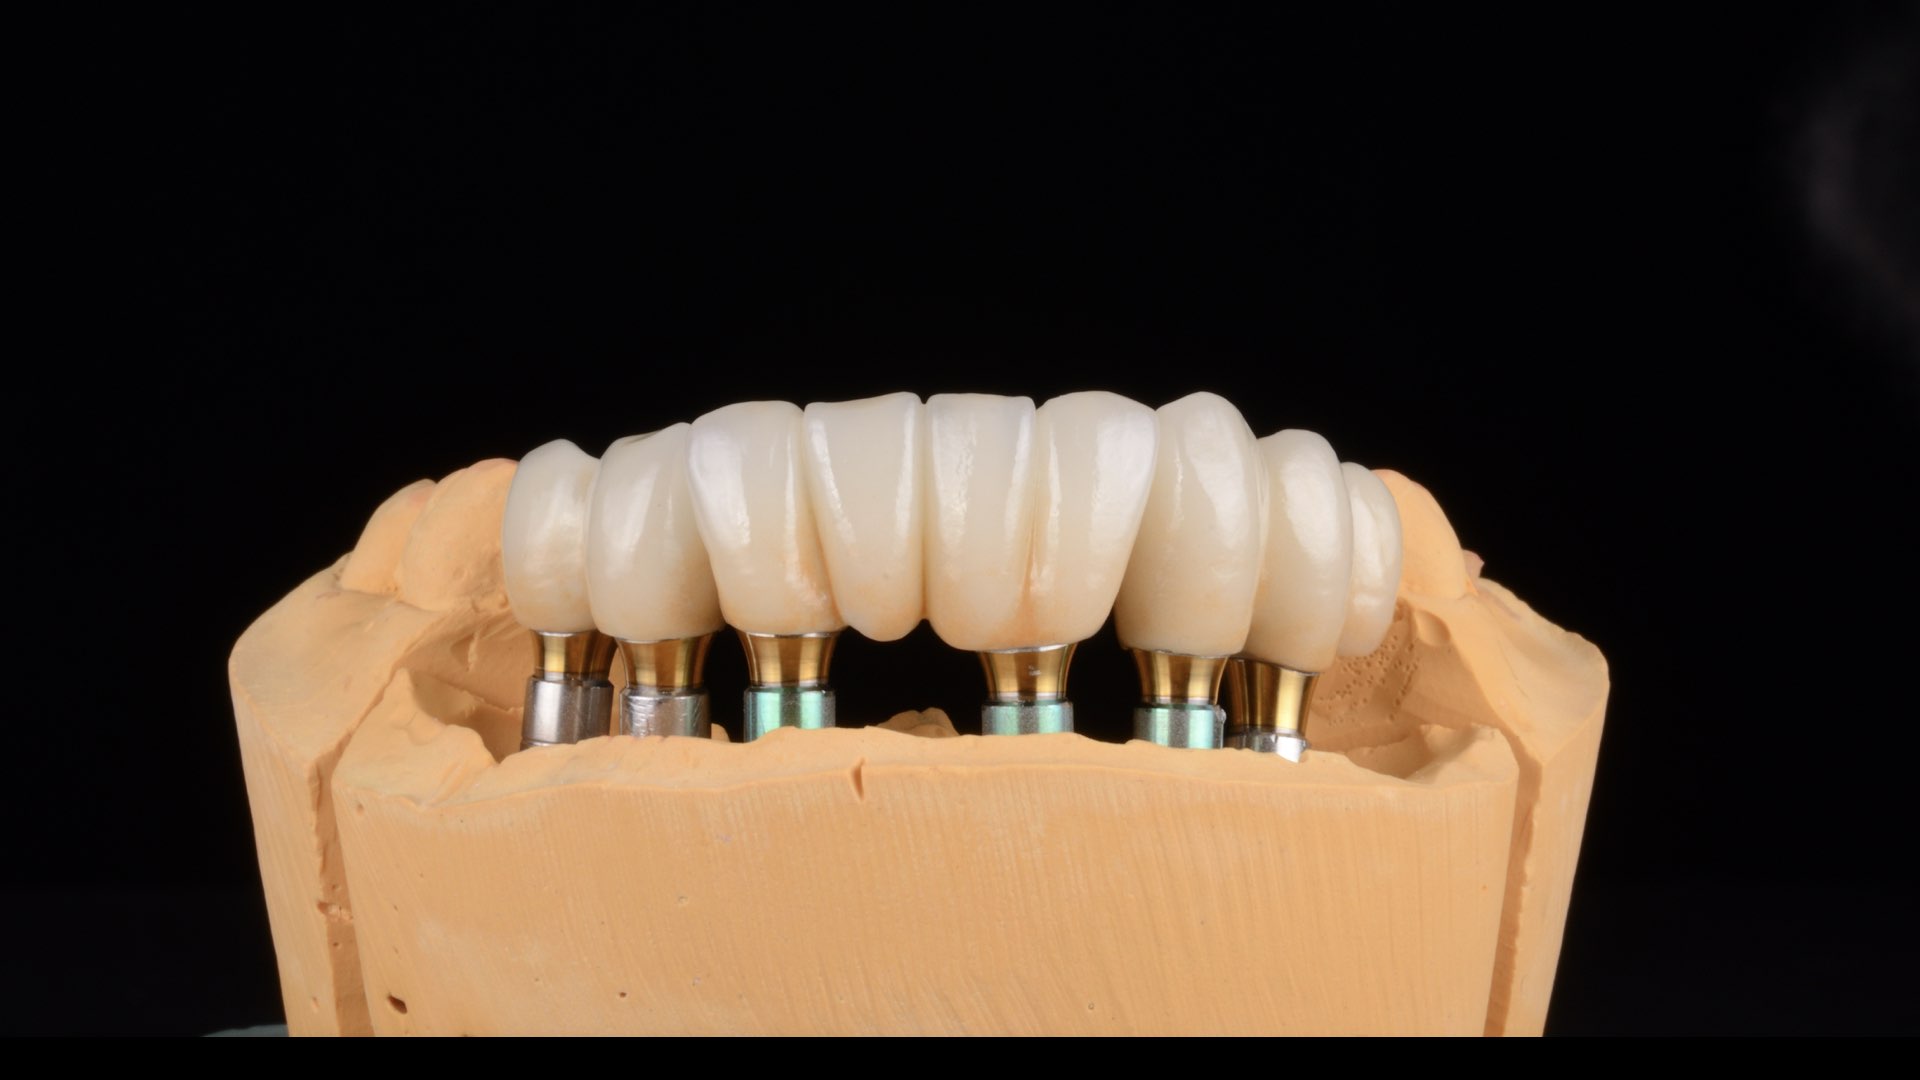 How to take care of dental implants?